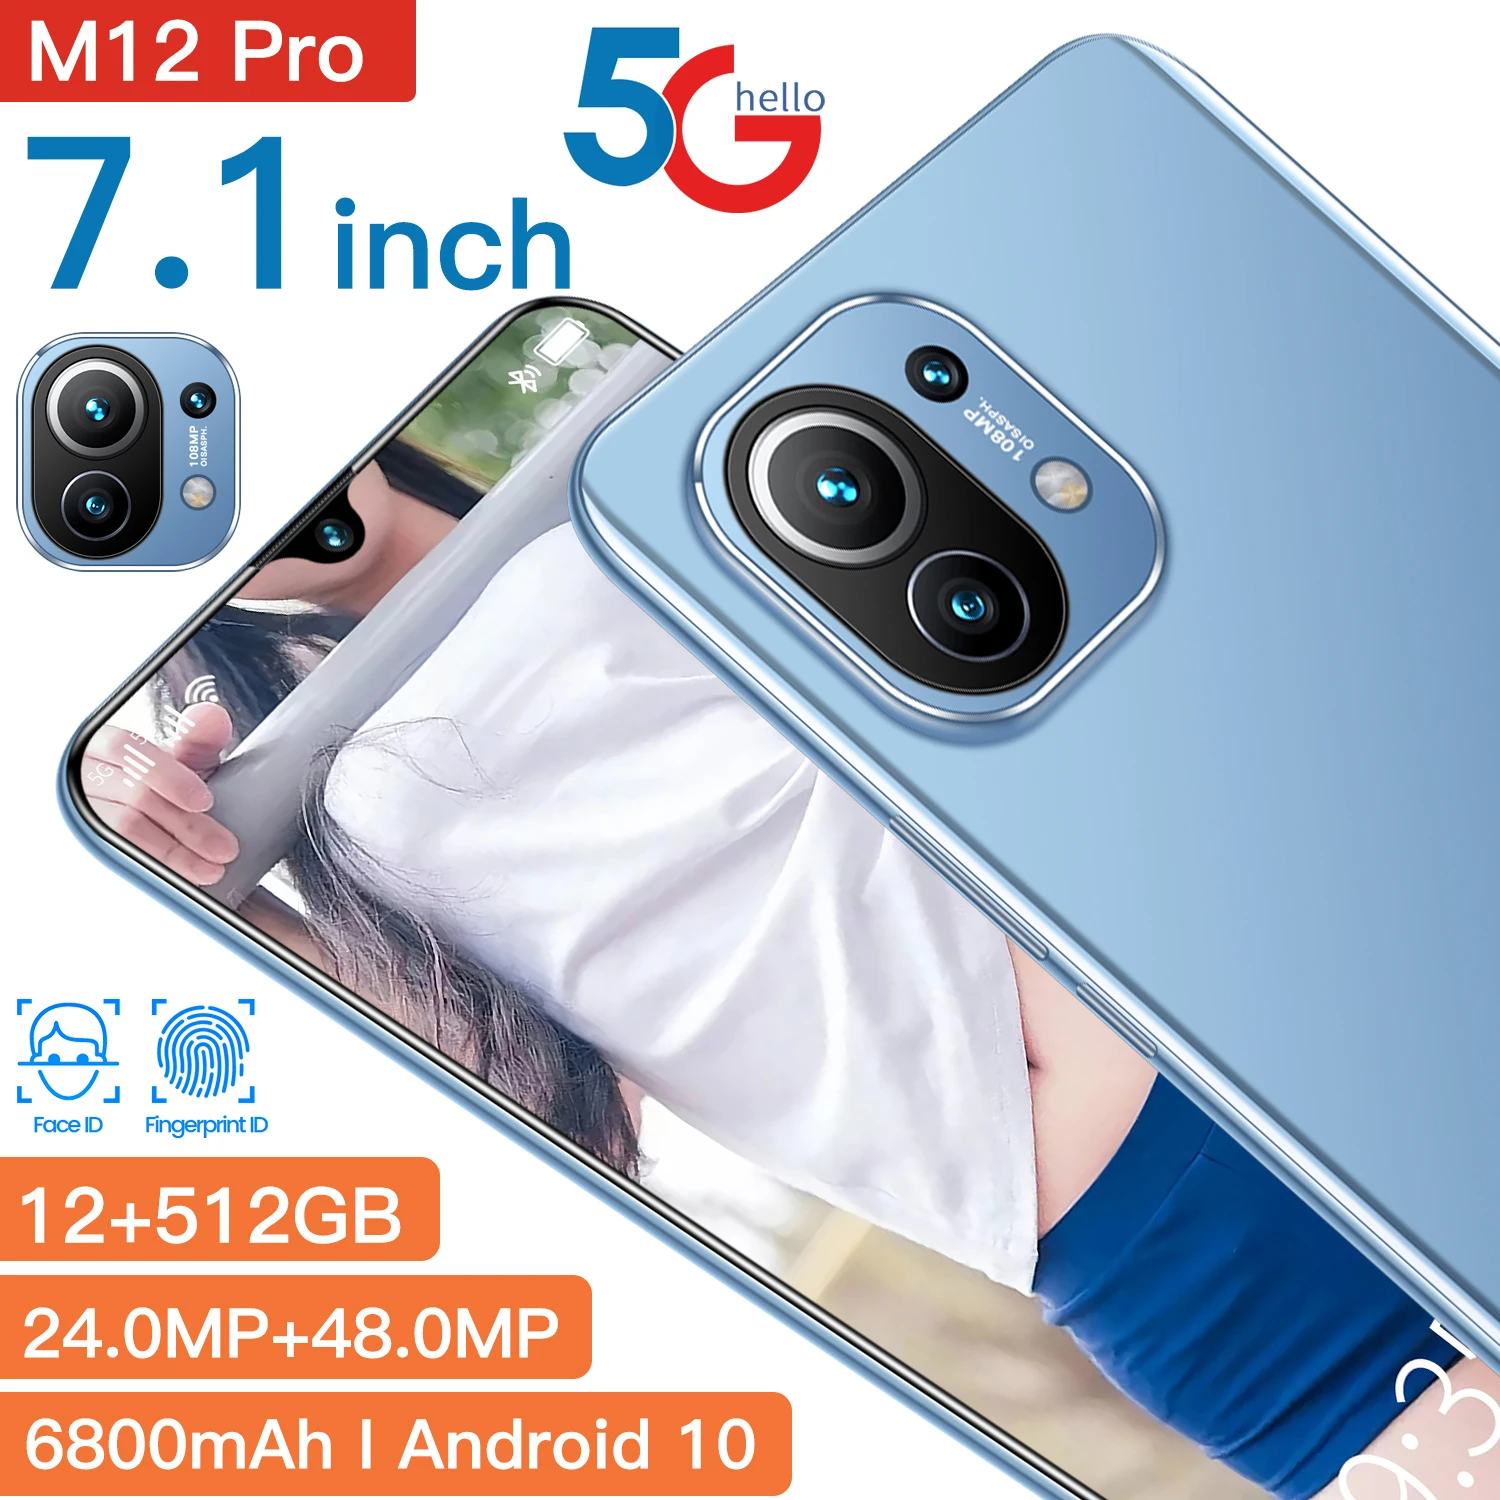 most popular android tablets Min Laptop Android 7.1 Inch M12 Pro 16GB 512GB 6800mAh Dual SIM 5G 10 Core Bluetooth 24MP 48MP Face ID Global Version Tablet best affordable tablet